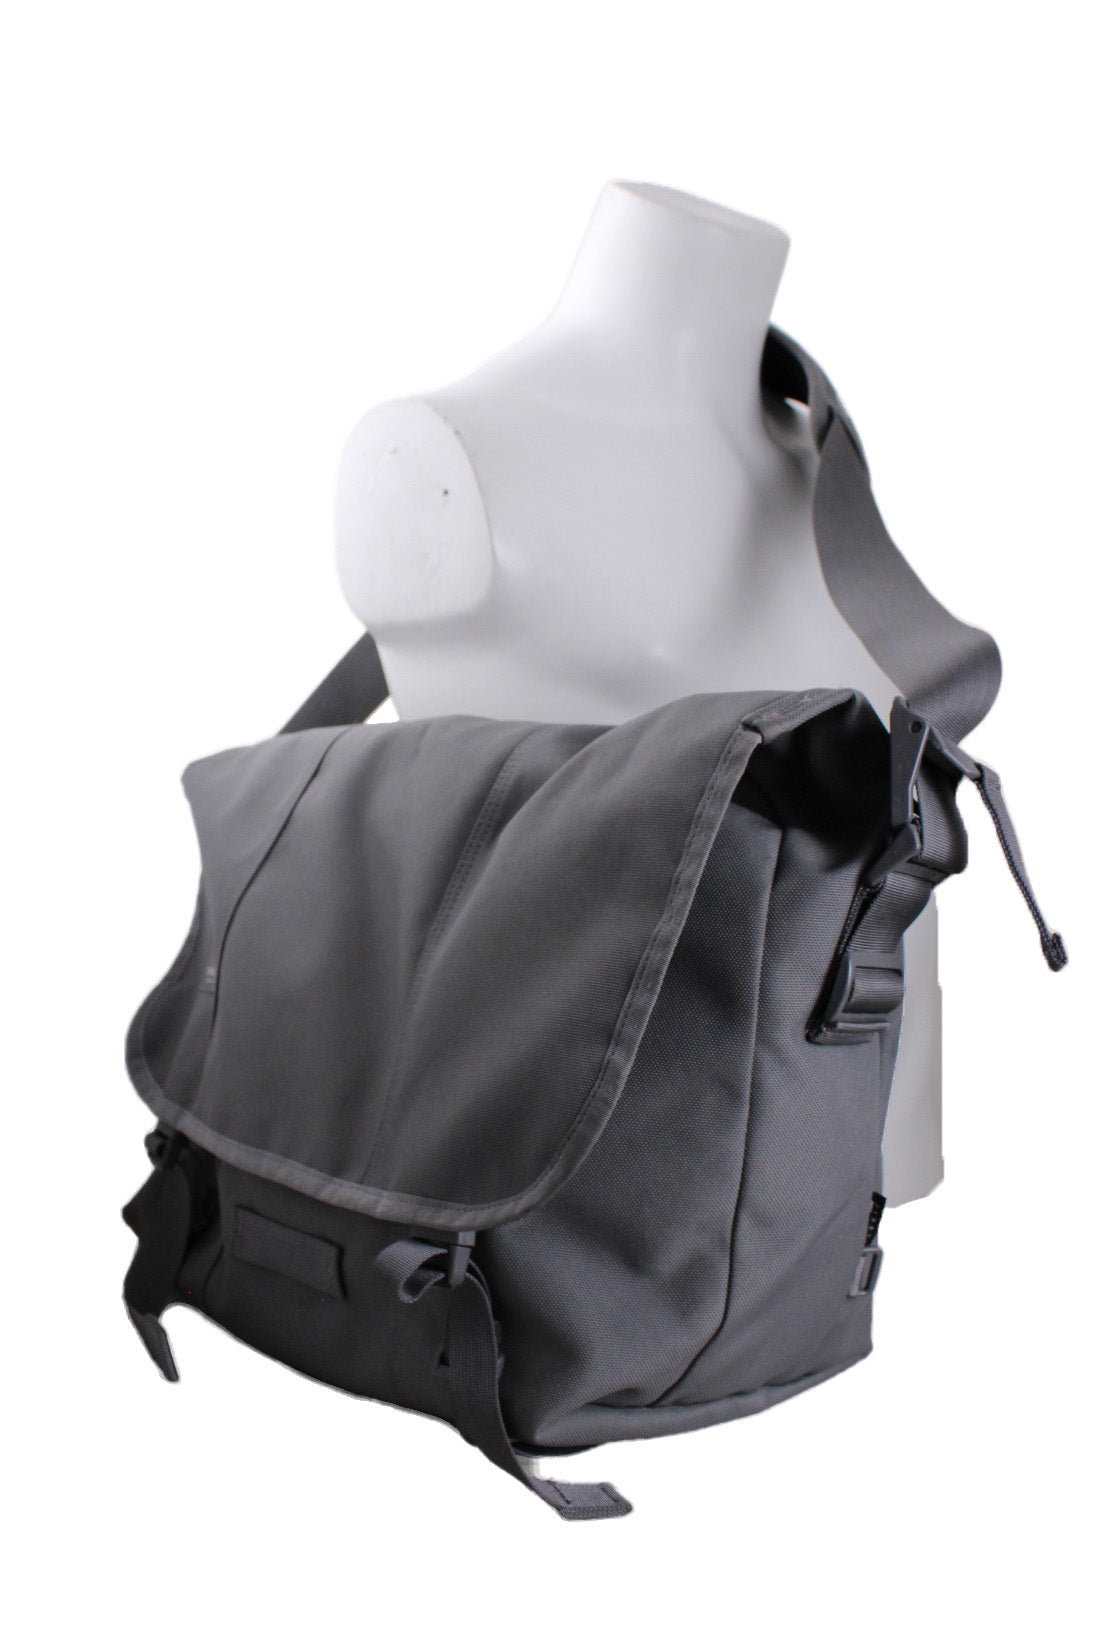 3/4 view with adjustable padded shoulder strap.